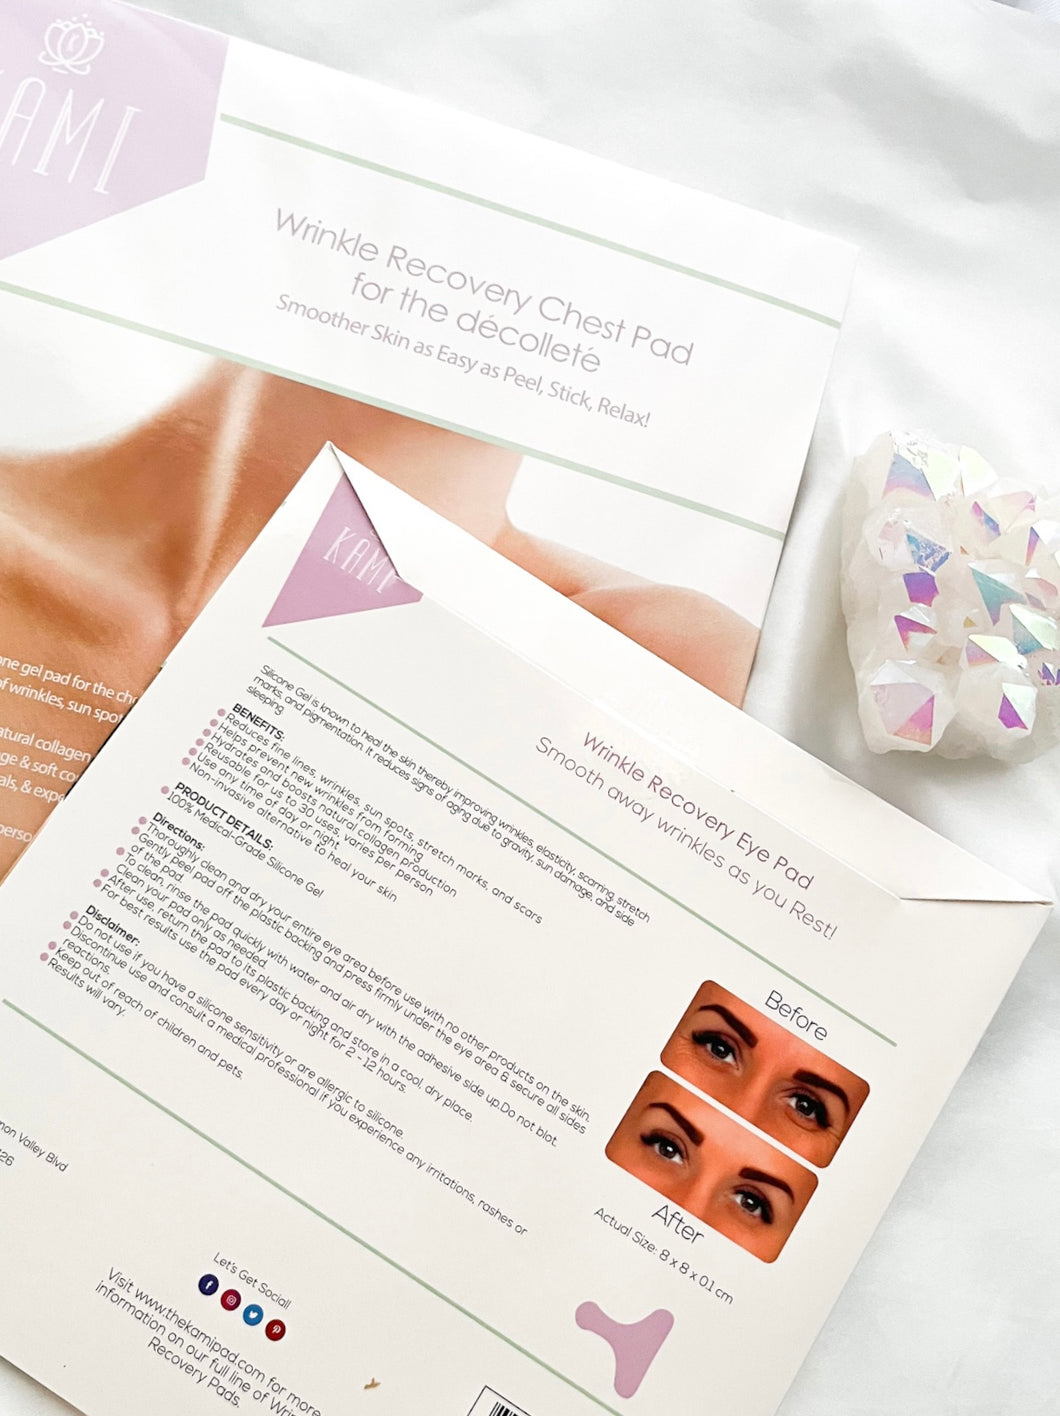 Wrinkle Recovery Forehead & Eye Pad Value Gift Set